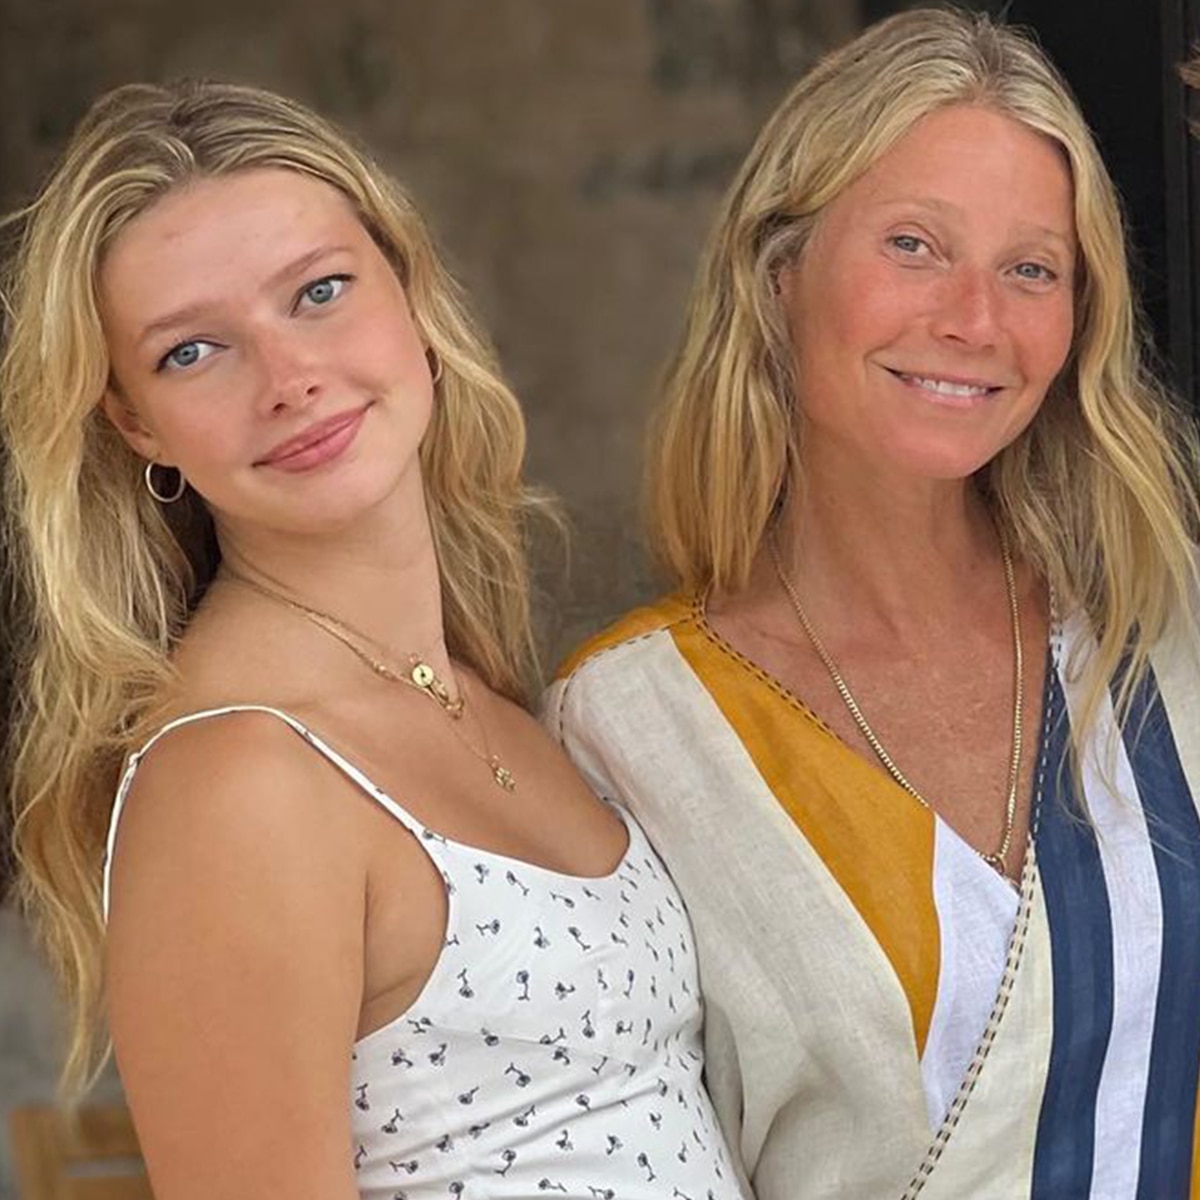 Paltrow’s Daughter Apple Martin Pokes Fun at Her Mom